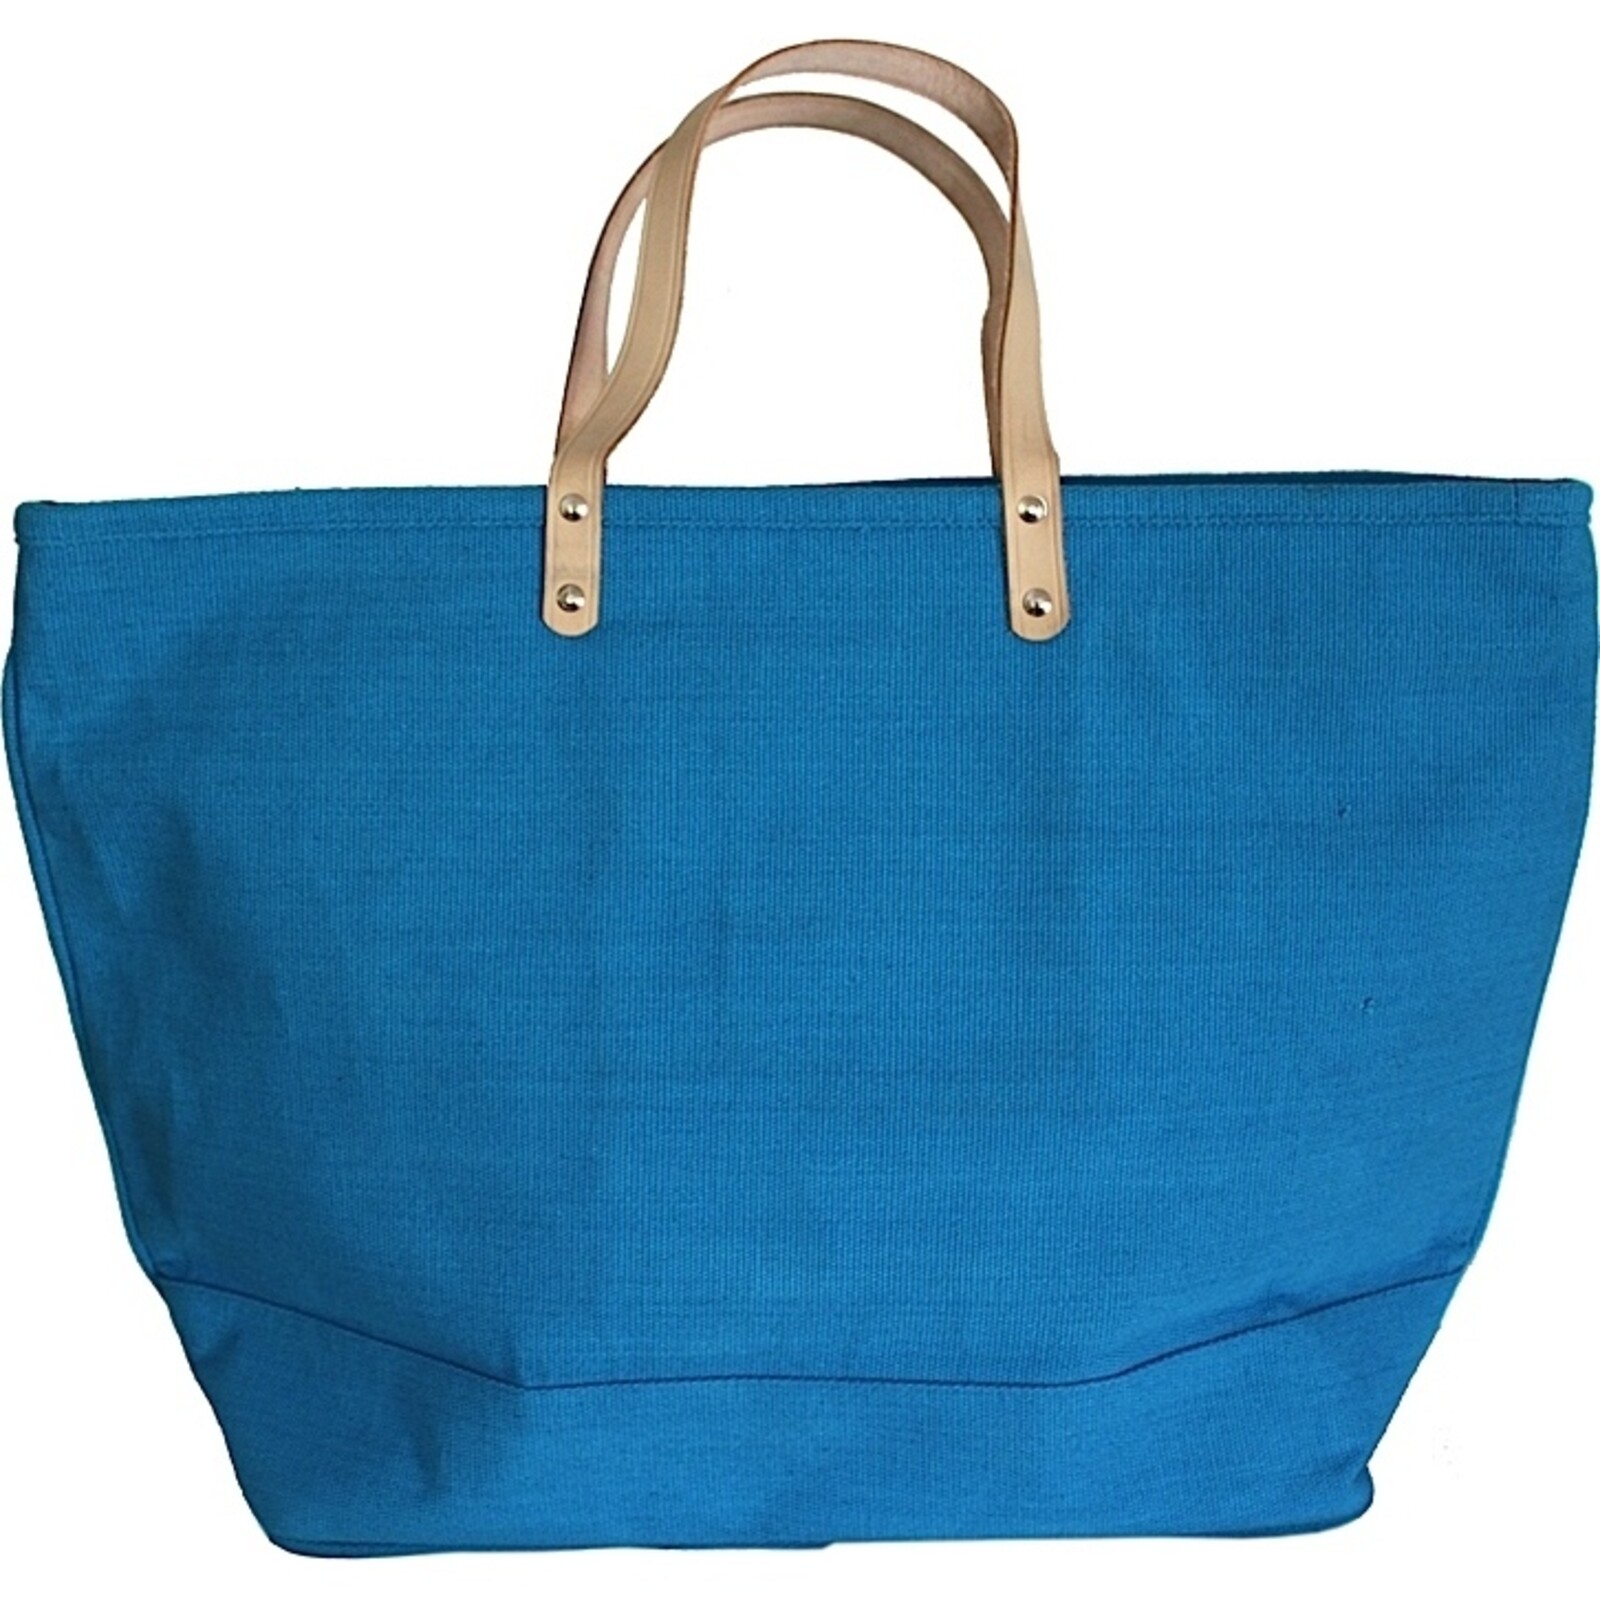 Turquoise Bag with leather Handles